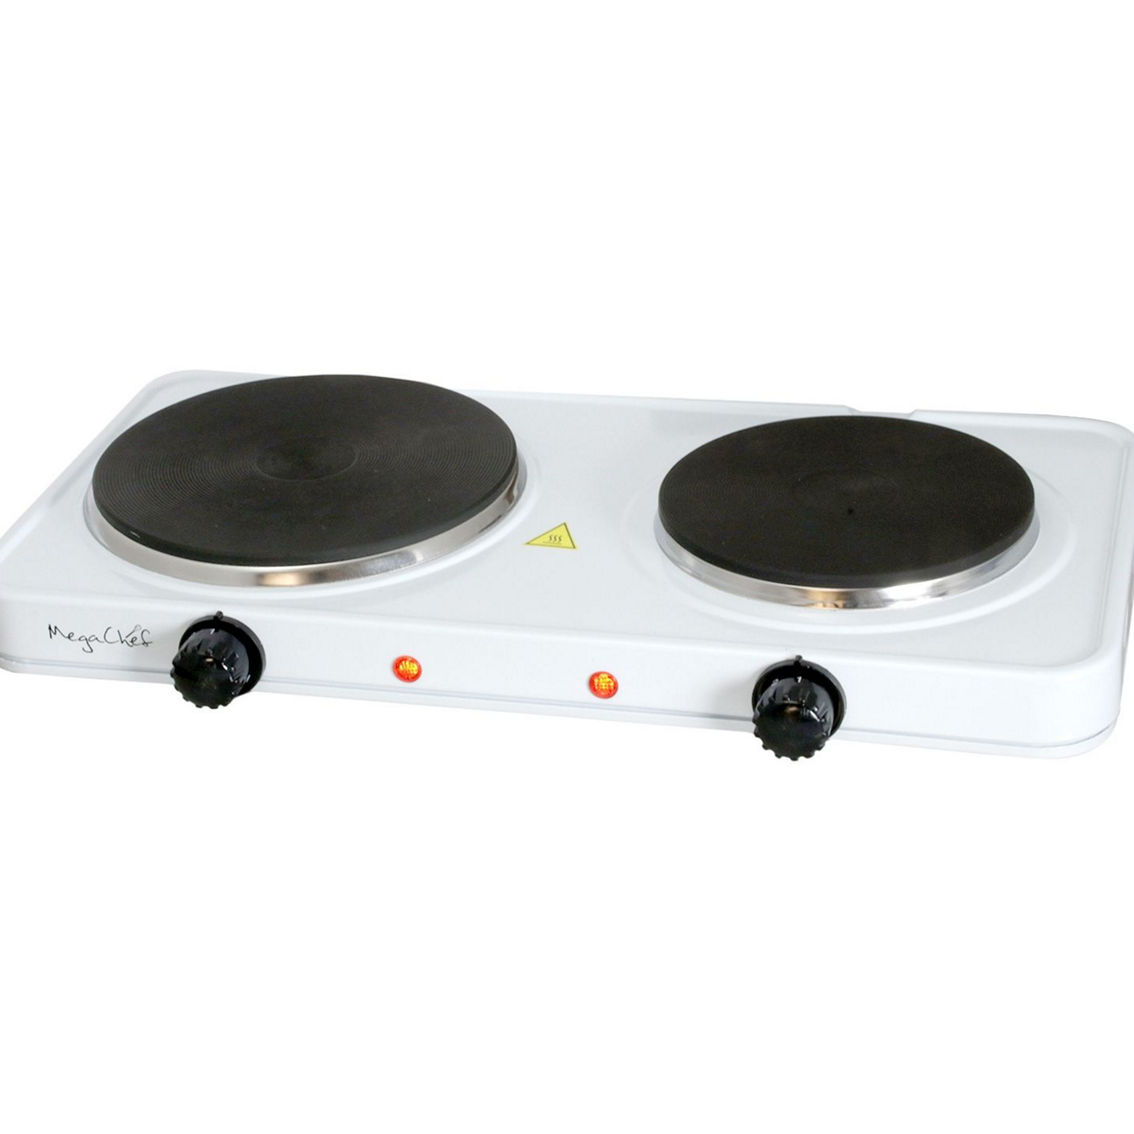 MegaChef Electric Easily Portable Ultra Lightweight Dual Burner Cooktop Buffet R - Image 5 of 5